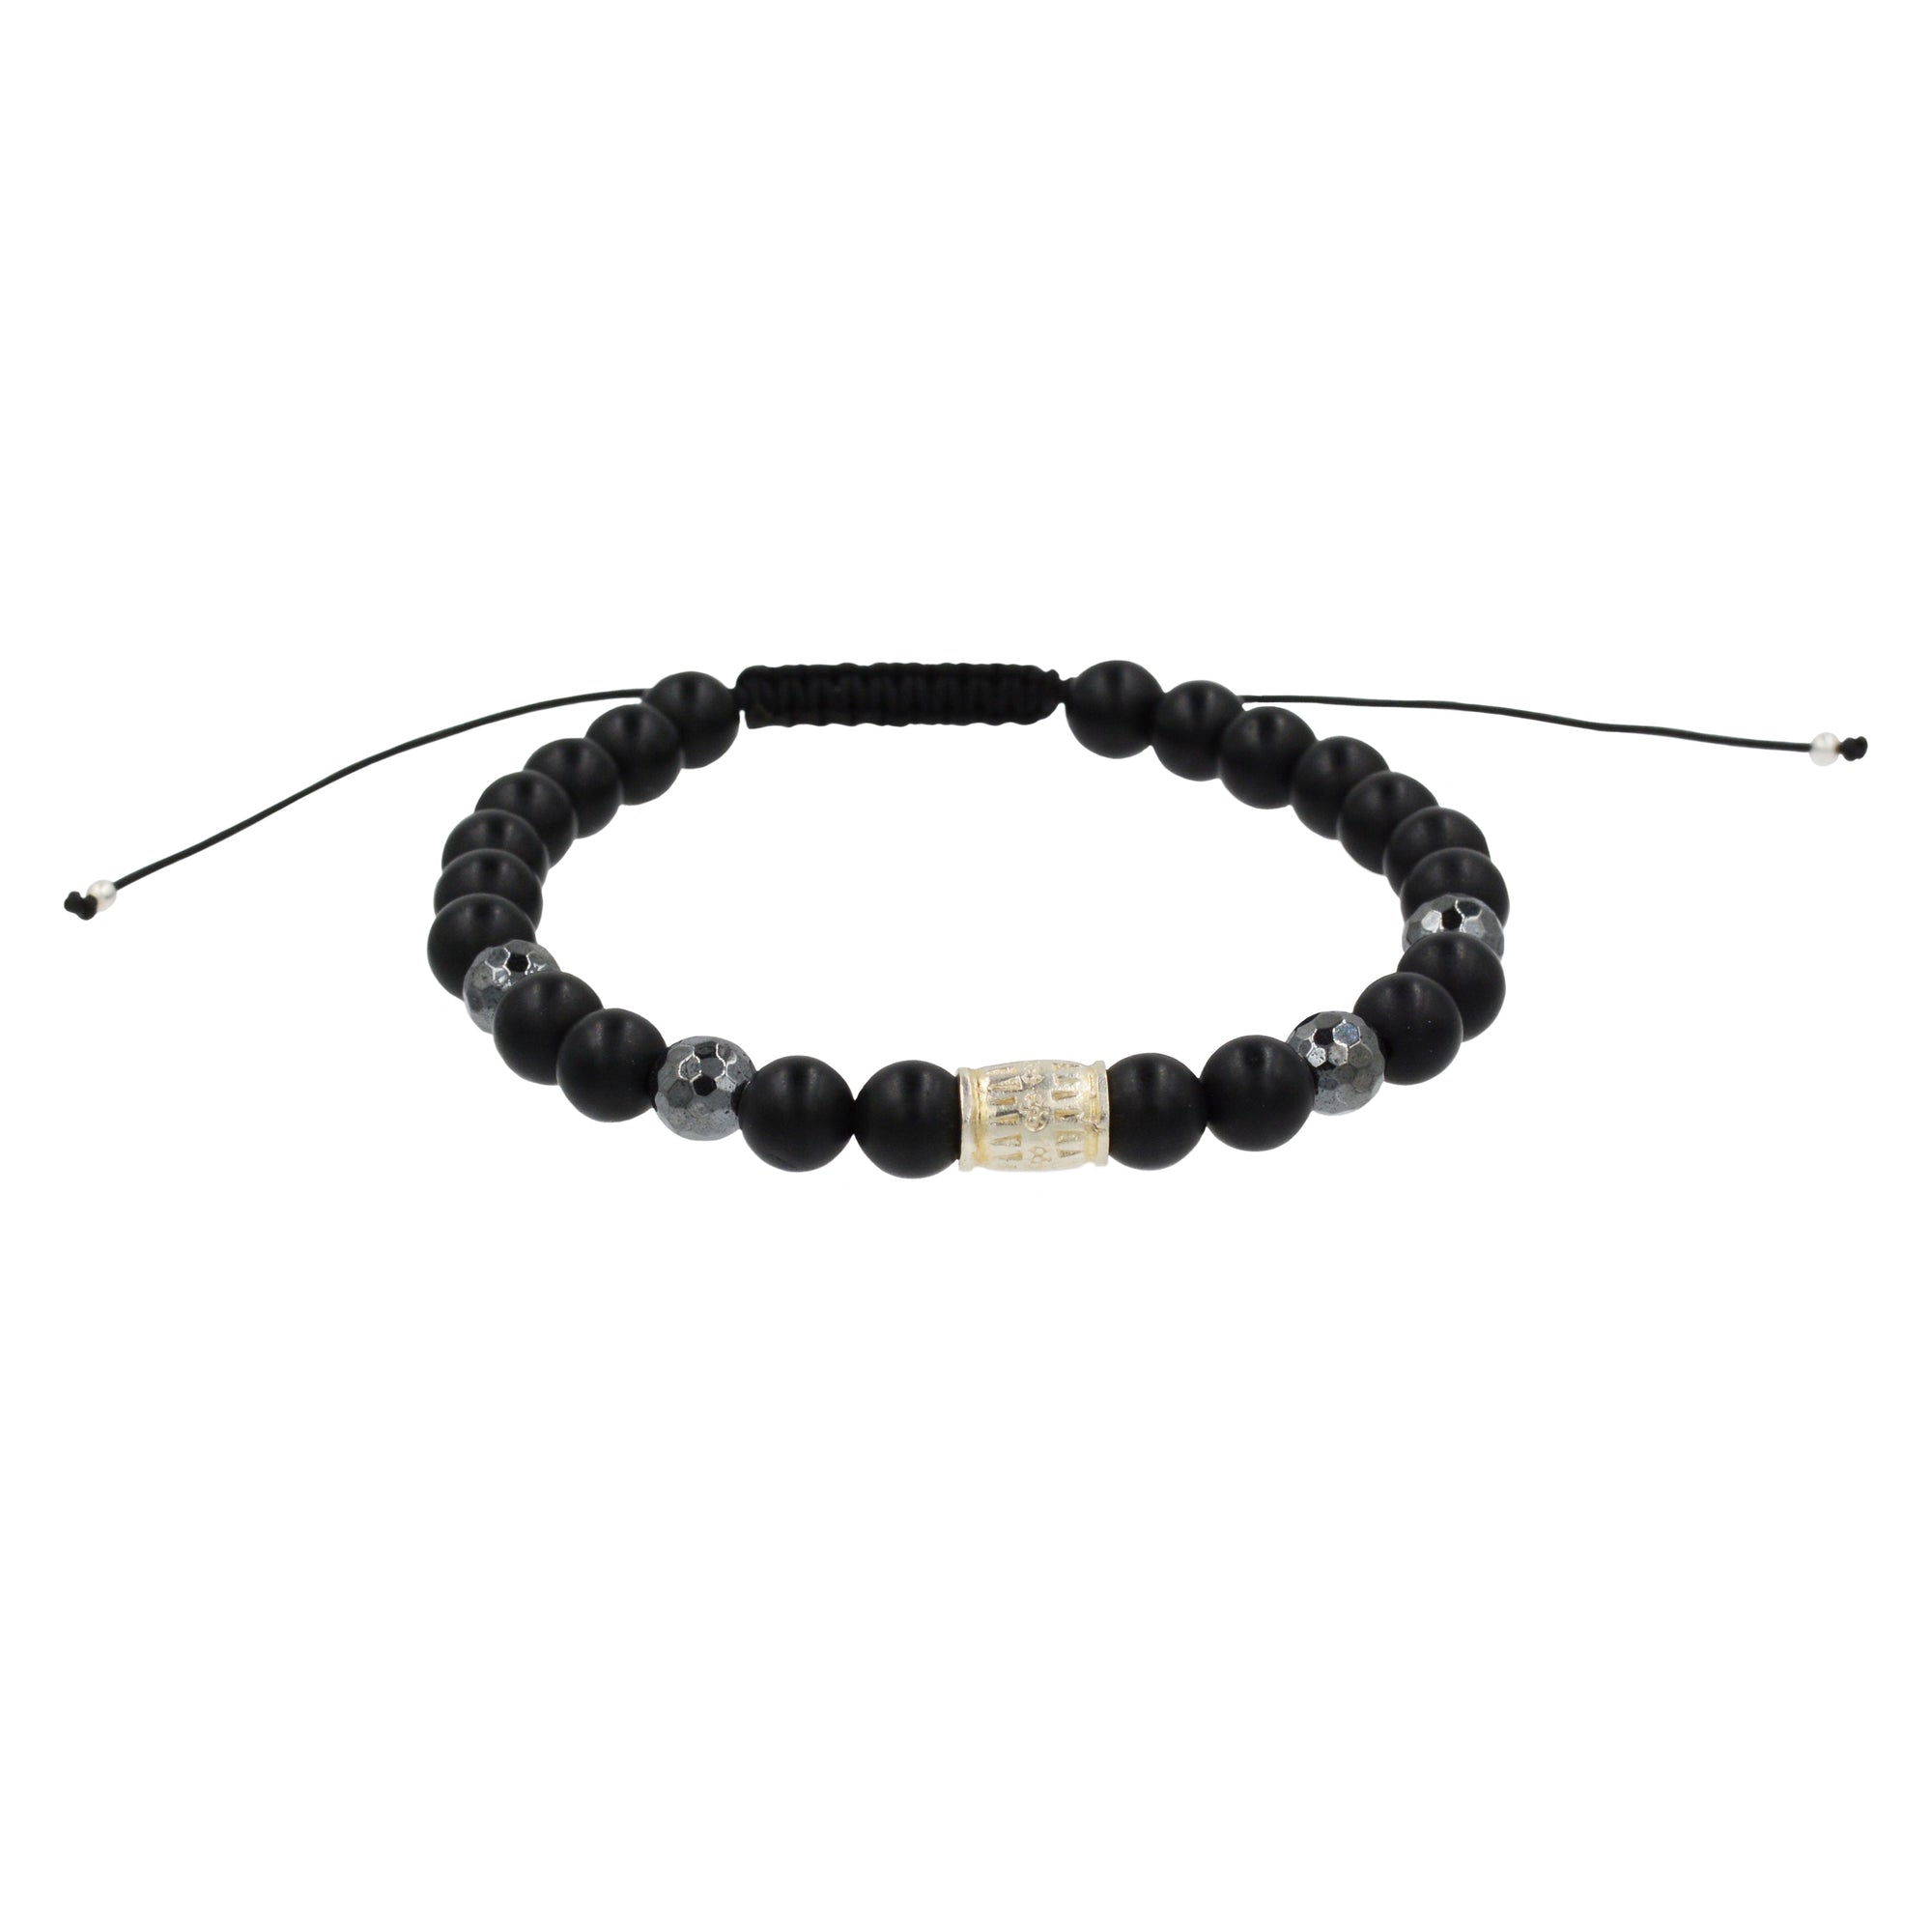 Black Onyx with silver beads